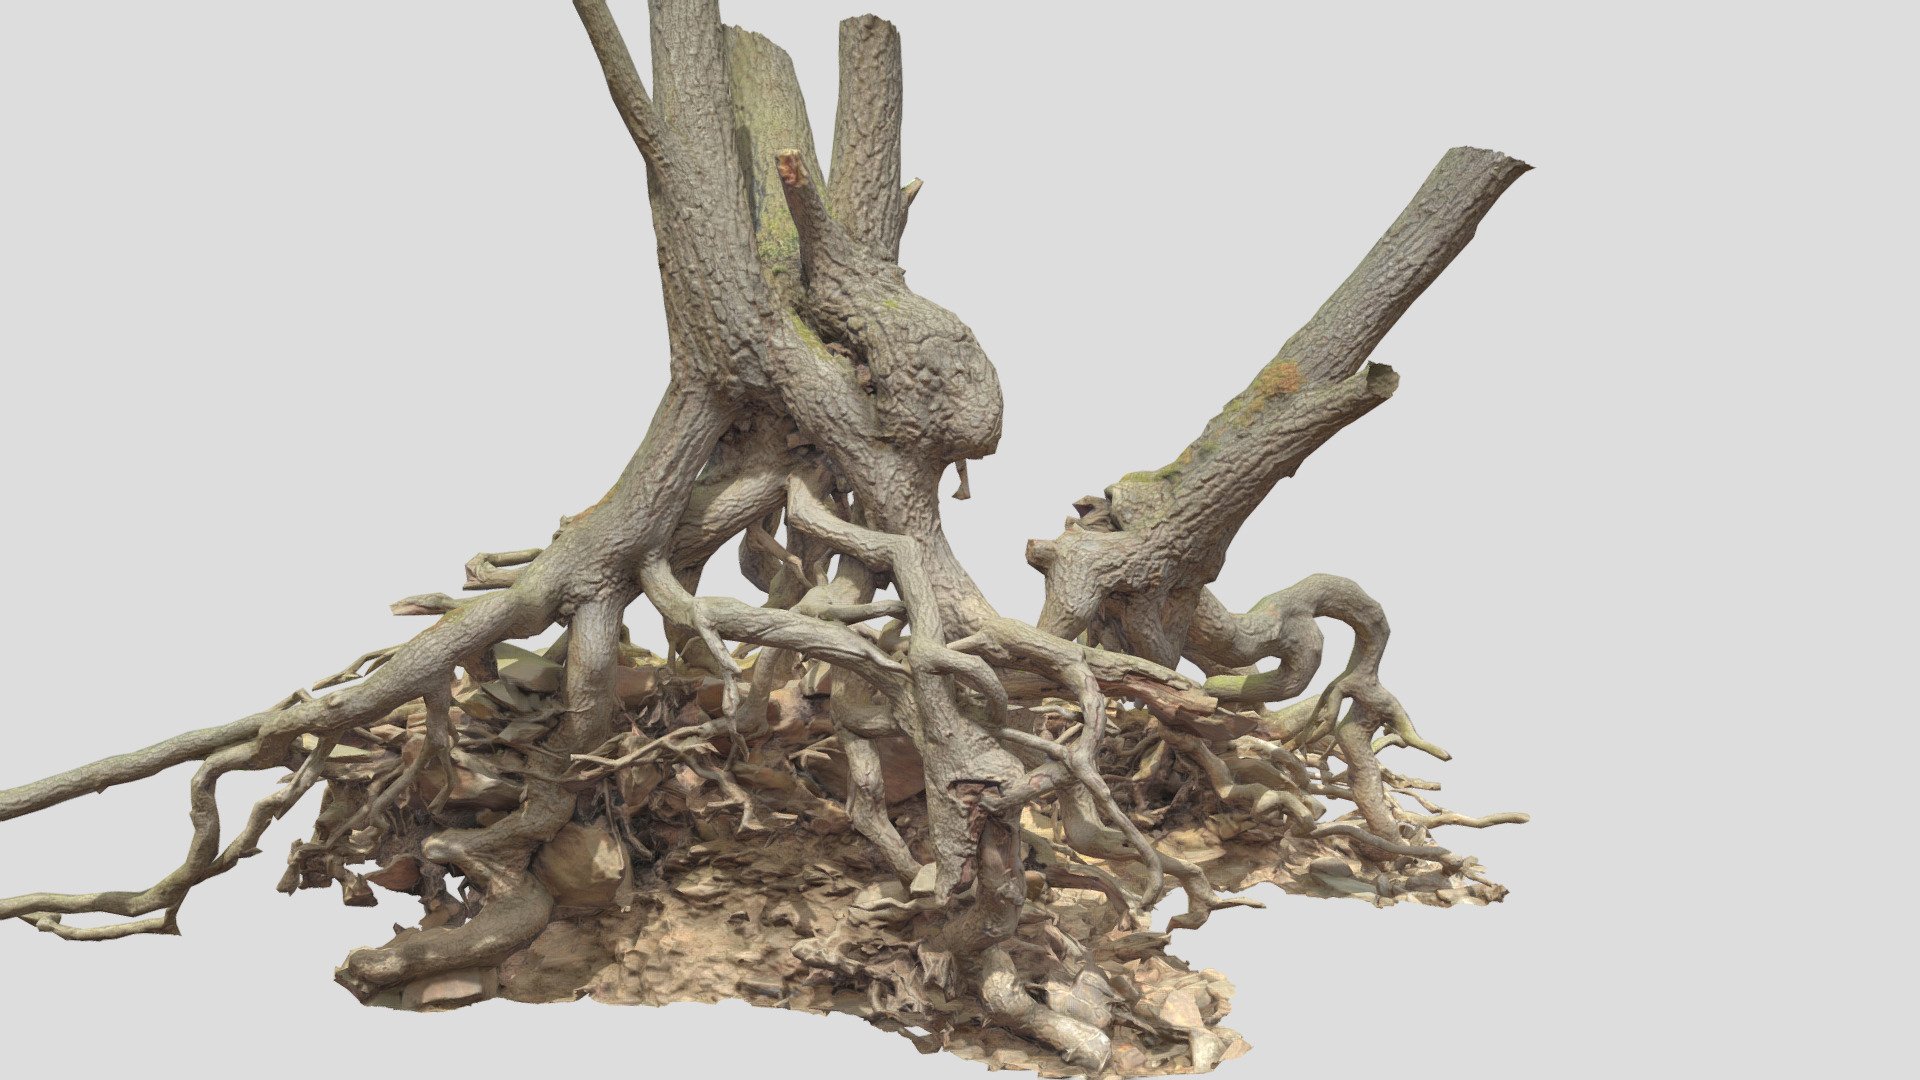 Fully processed 3D scans: no light information, color-matched, etc.

Ready to use for all kind of CGI

Source Contains:
- .obj
- .fbx
- .blend

8K Textures:
- normal map
- albedo
- roughness

Please let me know if something isn't working as it should.

Realistic Oak Roots Big Scan Overhang - Oak Roots Big Scan - Buy Royalty Free 3D model by Per's Scan Collection (@perz_scans) 3d model